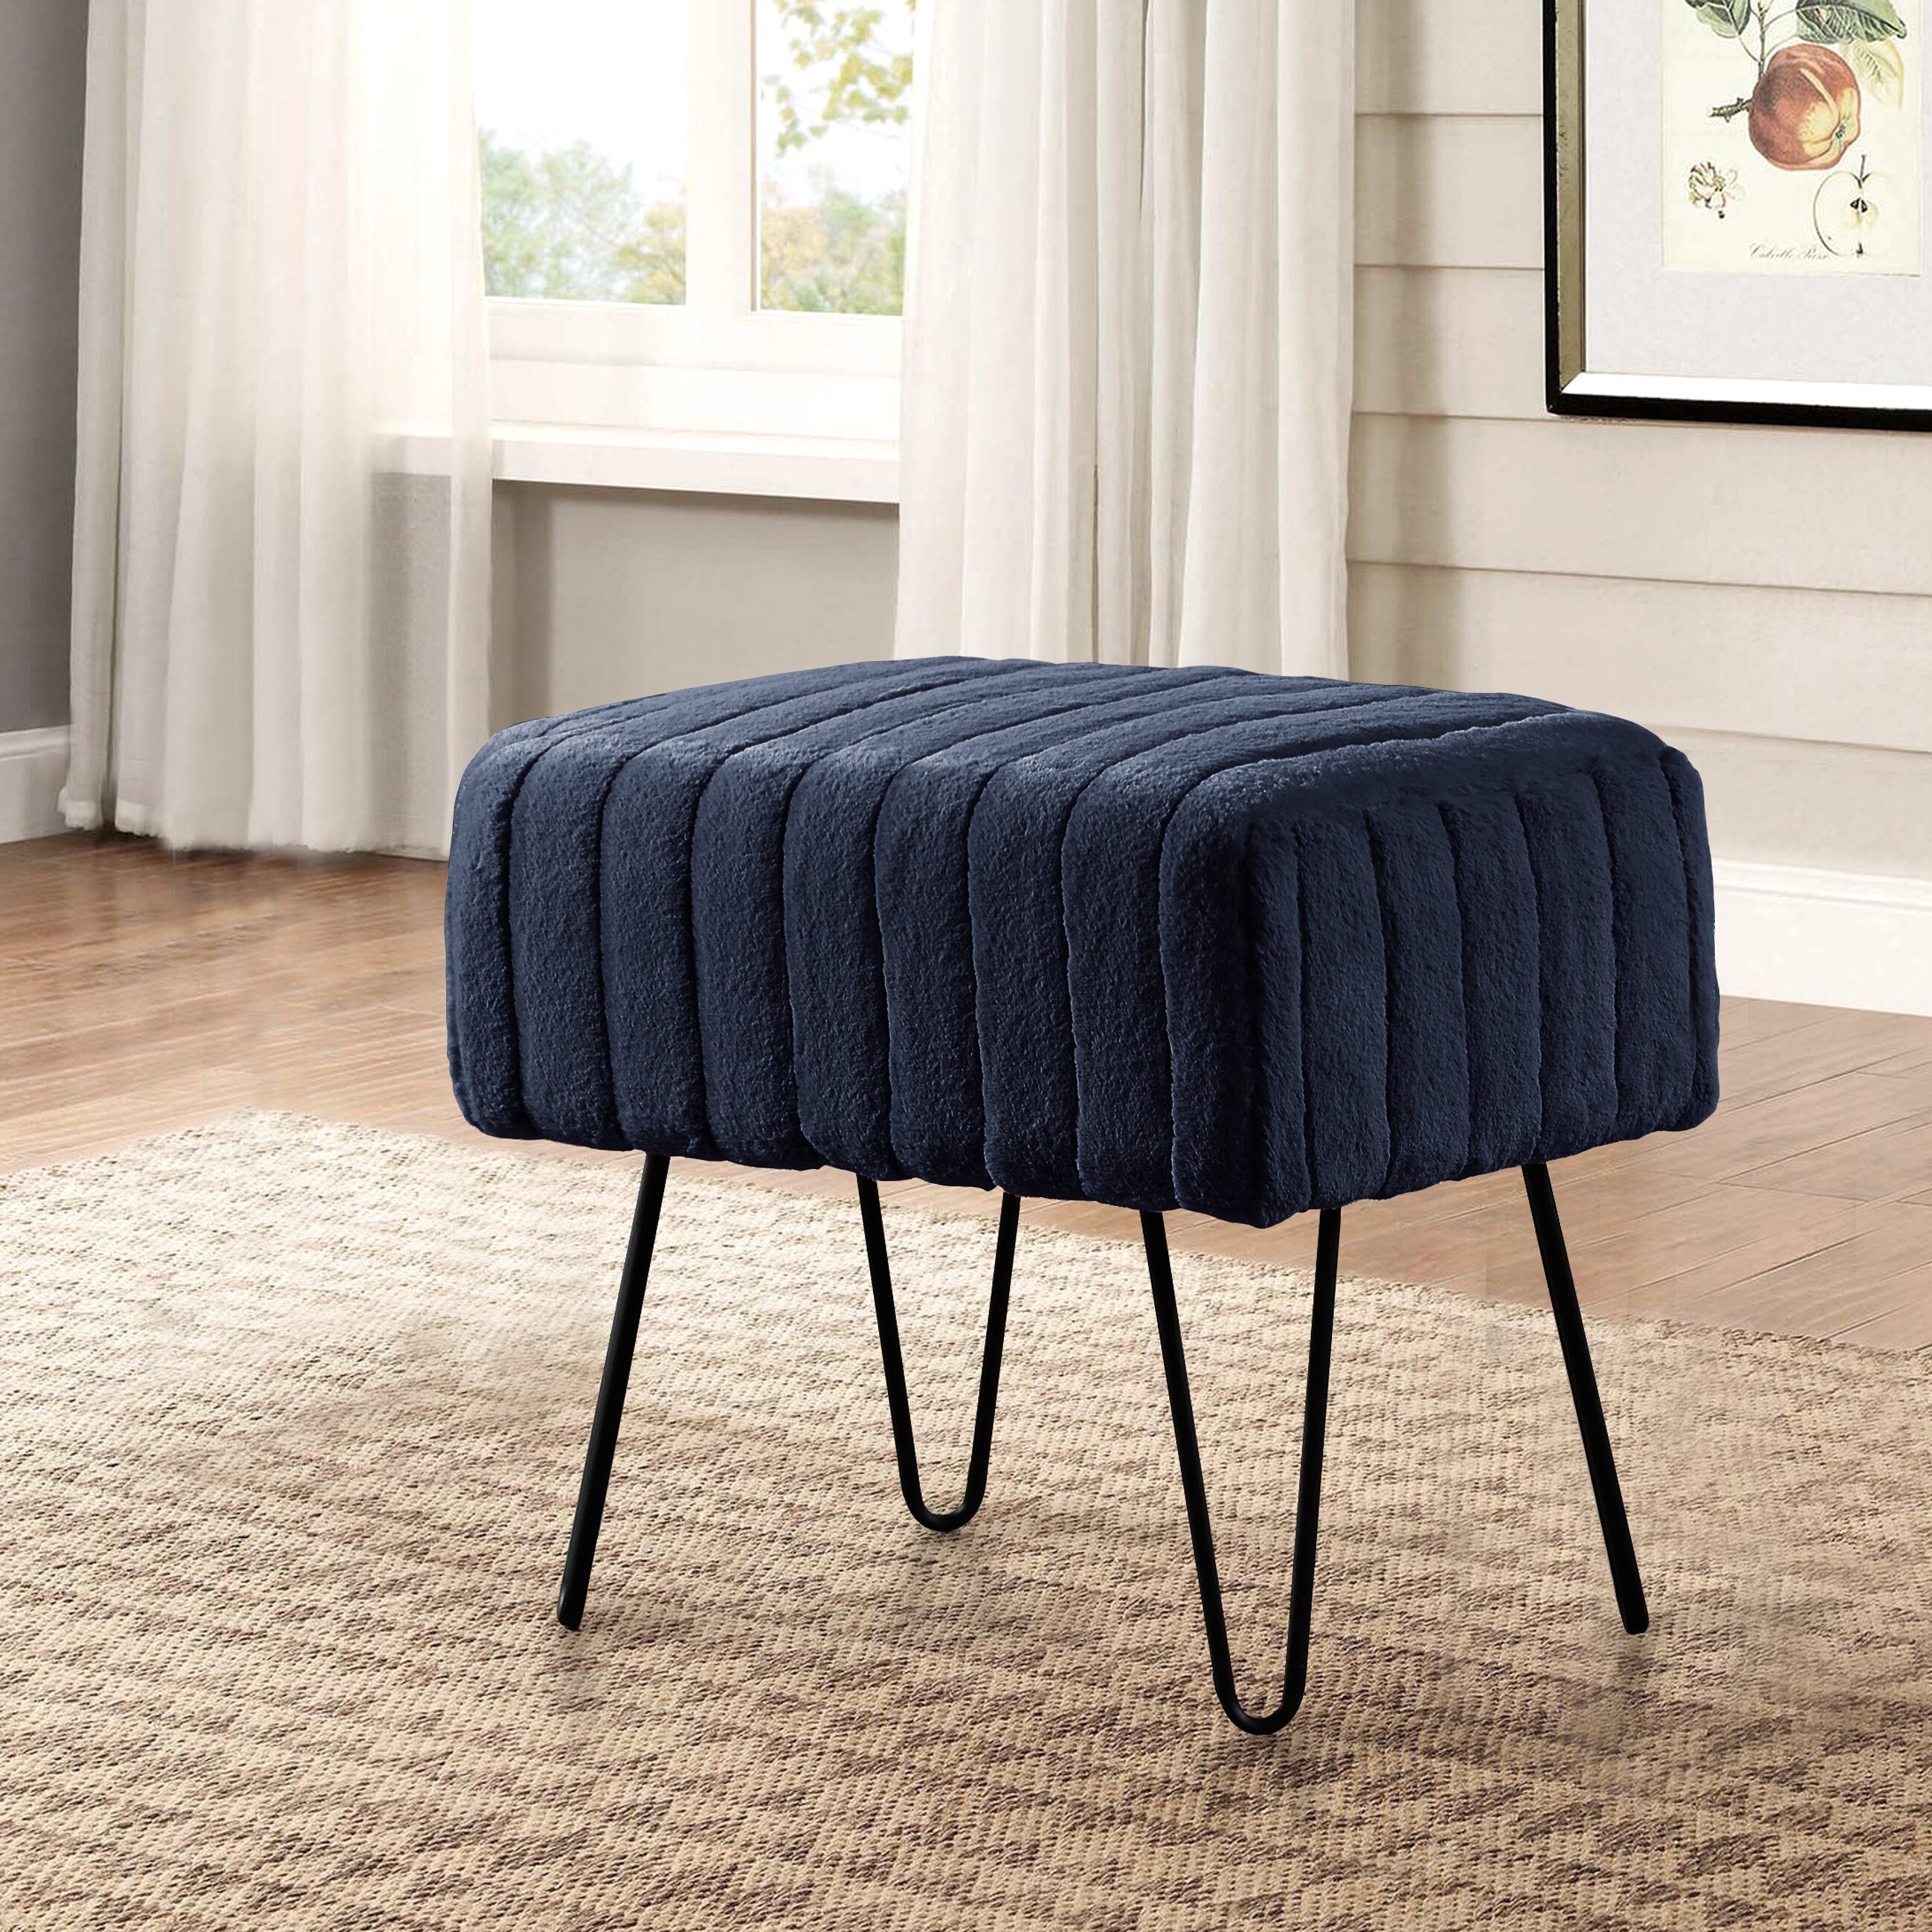 navy and black footstool